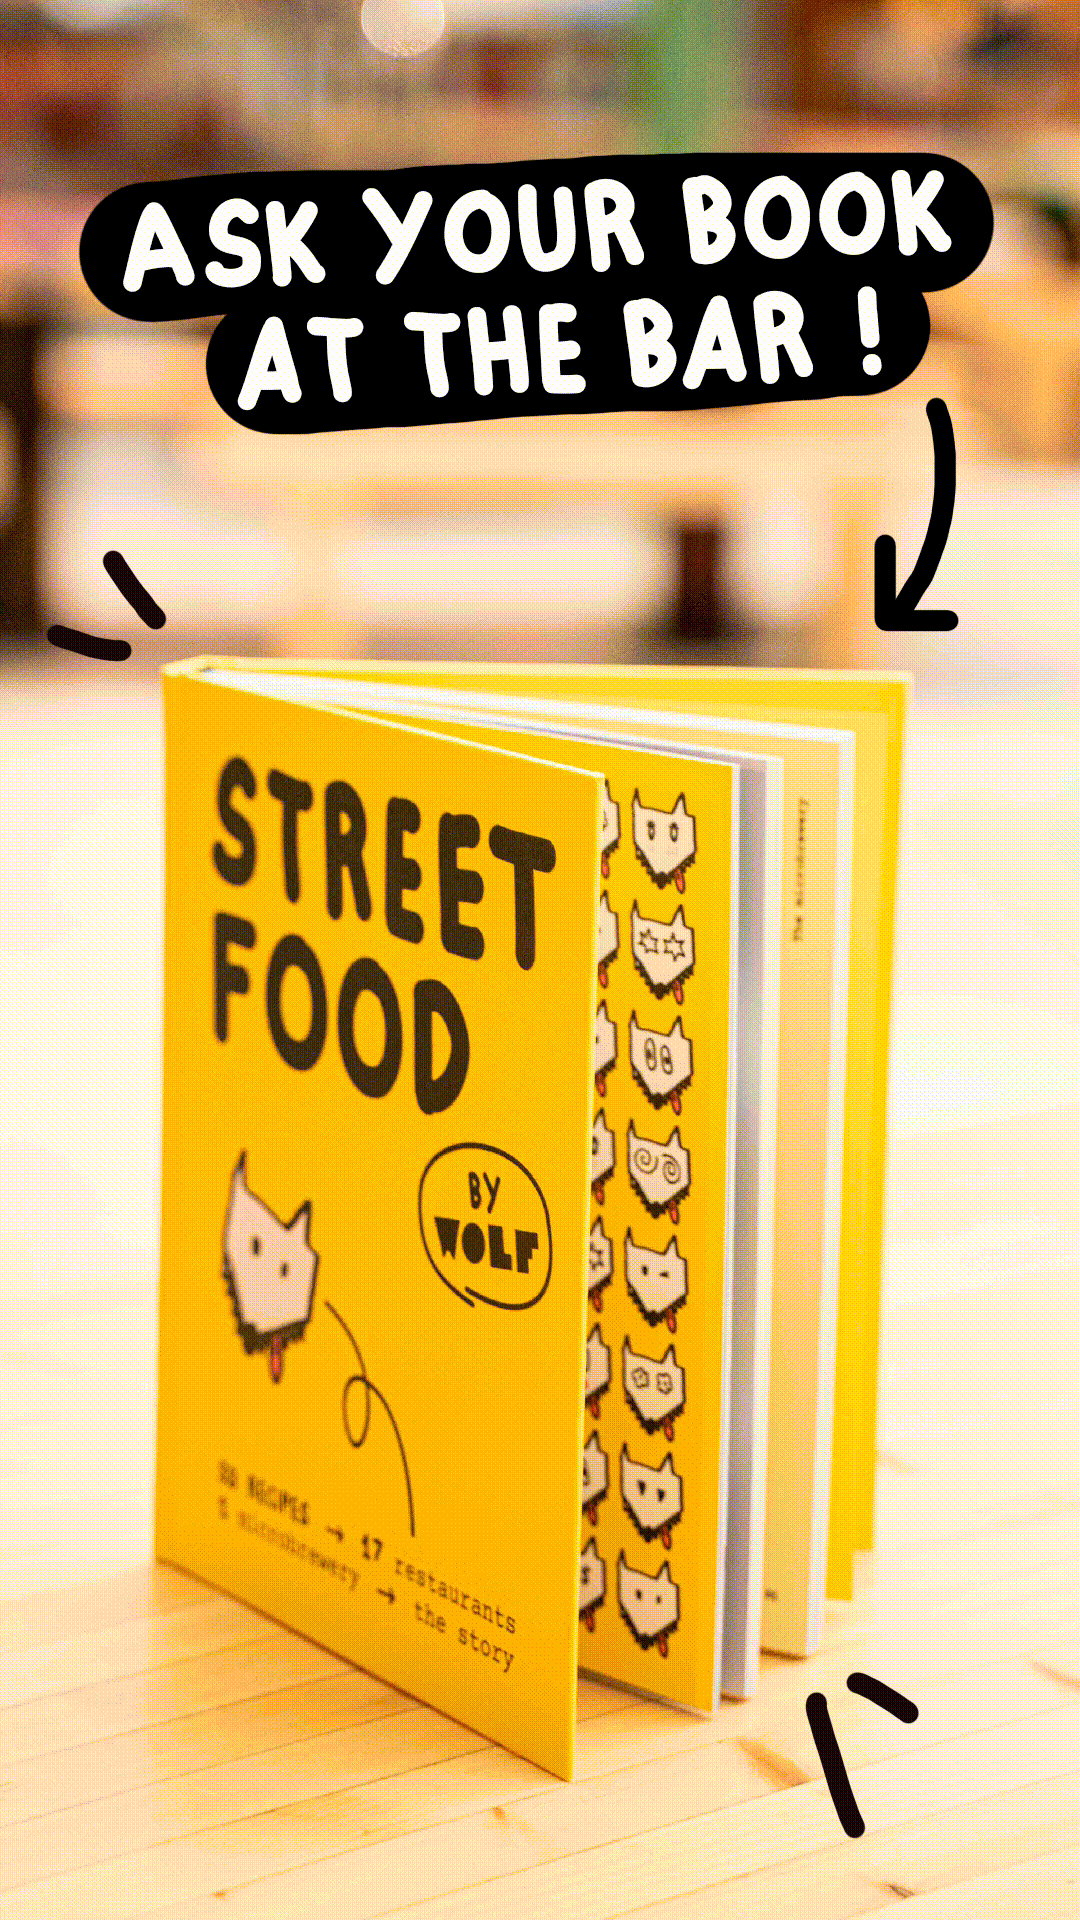 Street food by Wolf